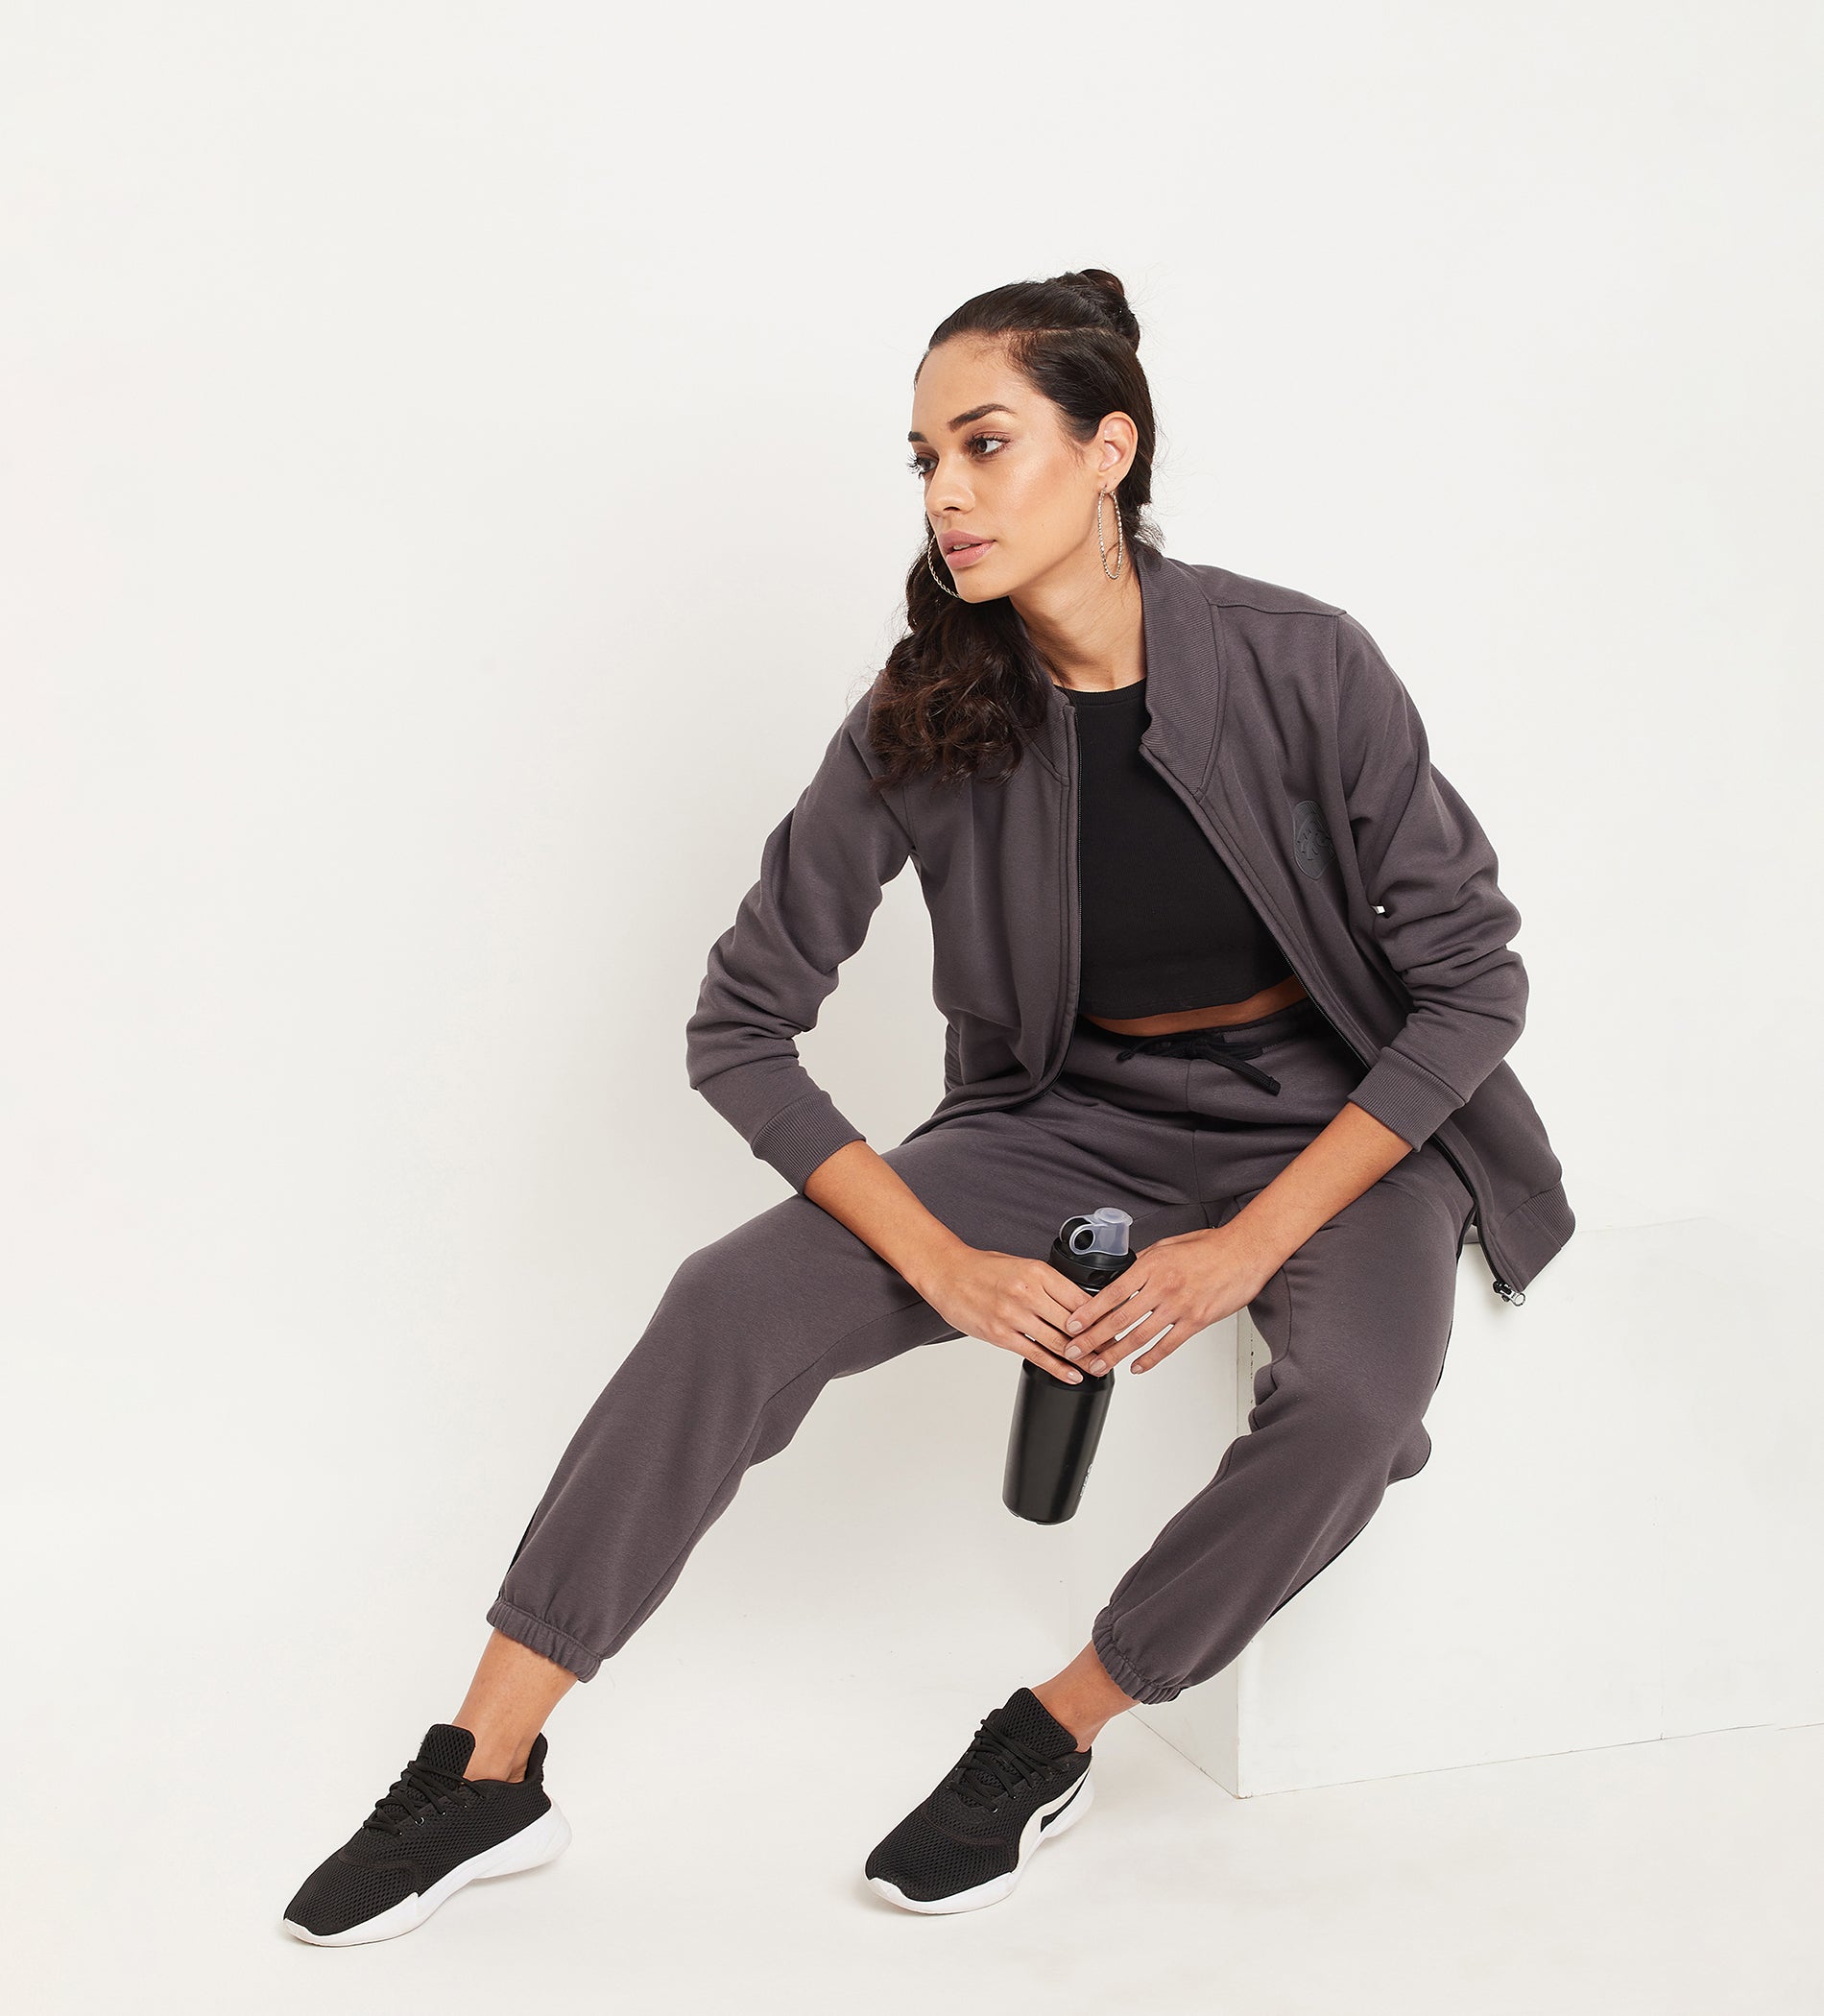 Women Charcoal Fleece Jogger with Piping